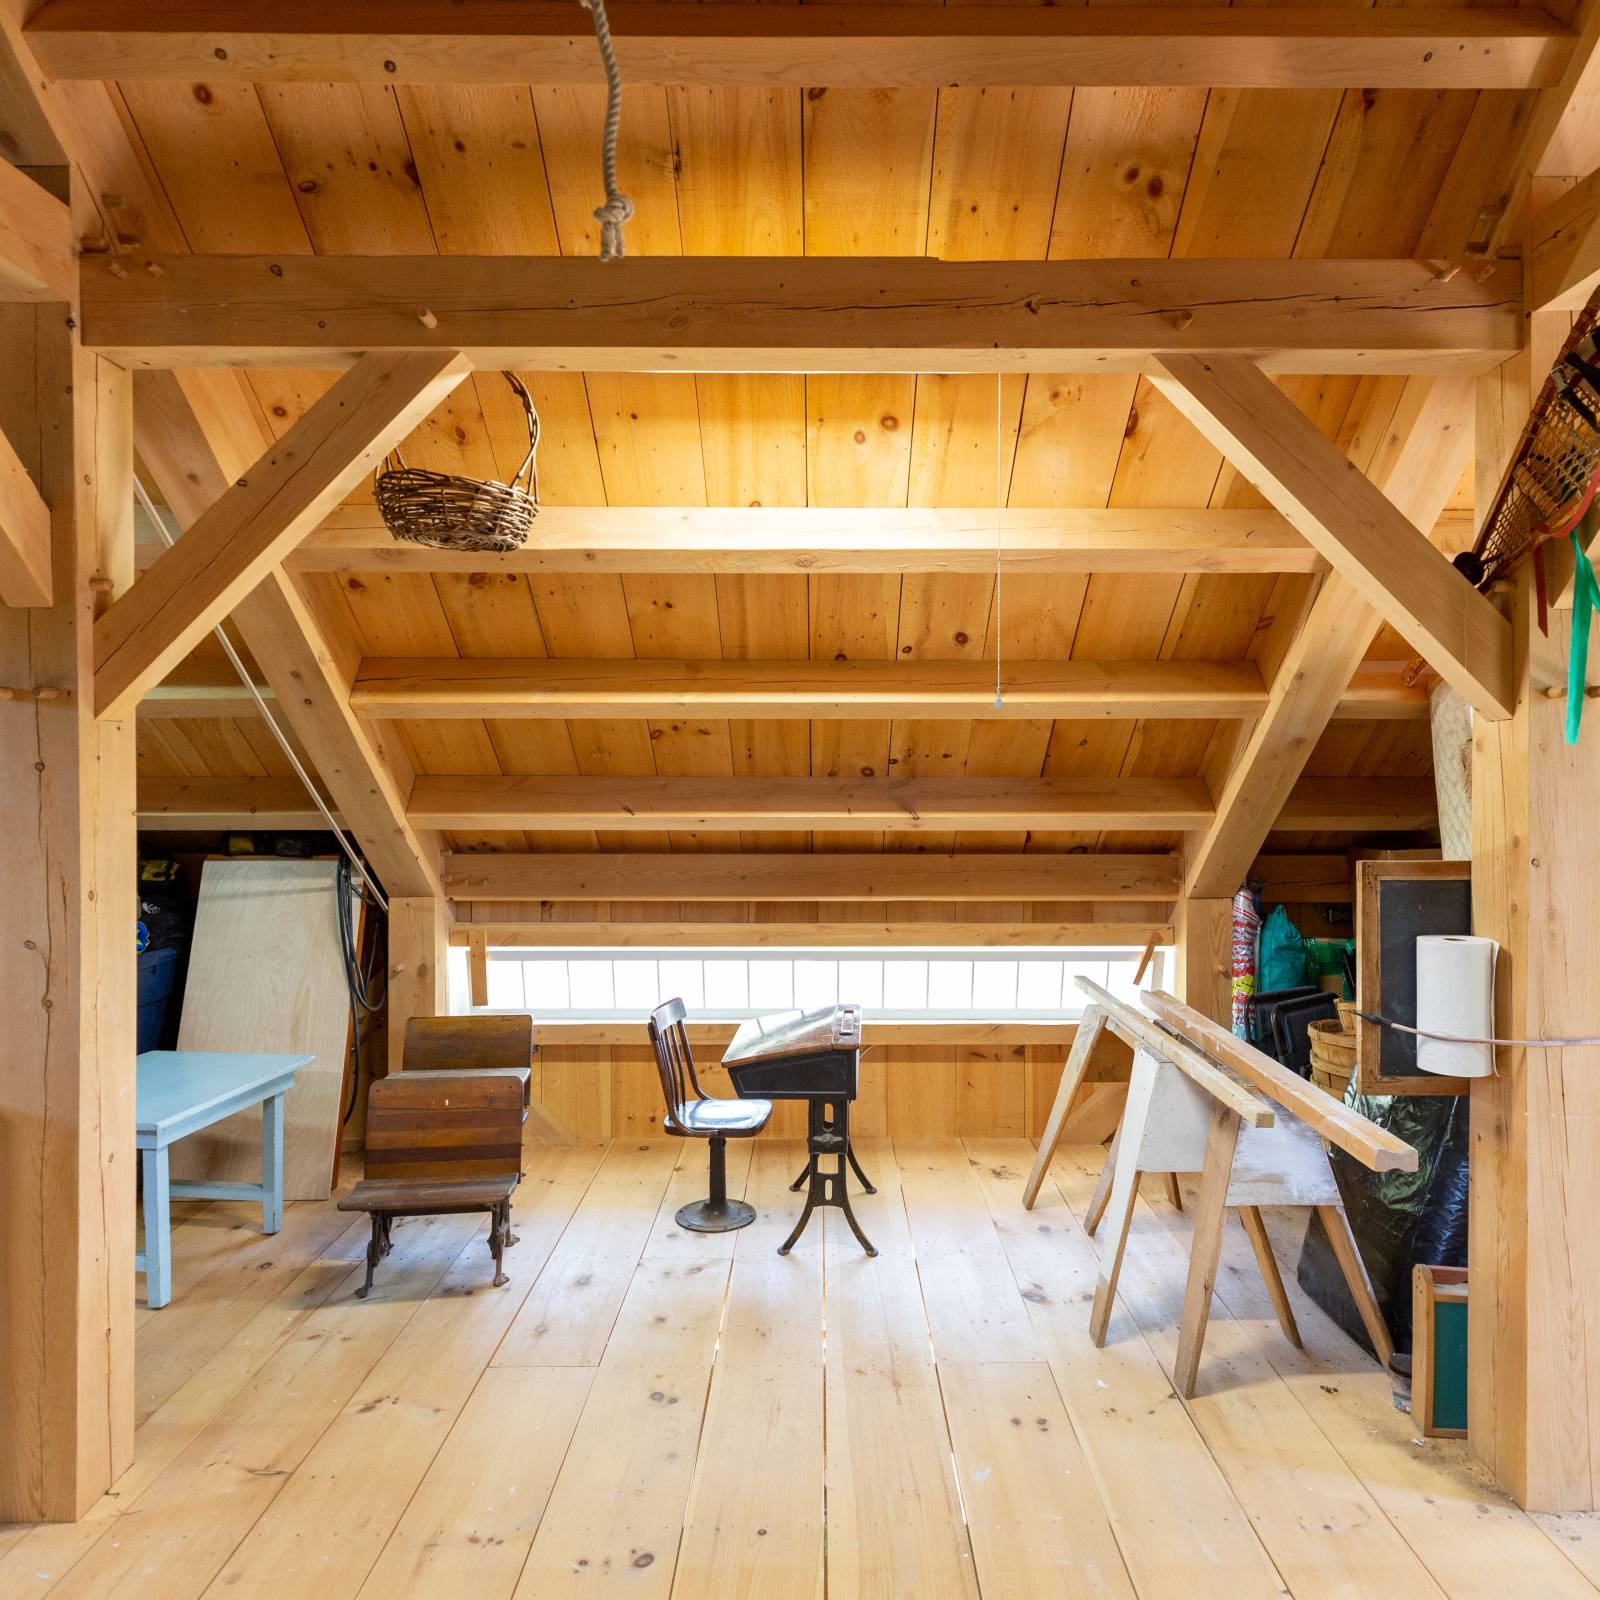 Ridge Beam Roof System with Purlins Between Rafters • Rustic Post and Beam Barn